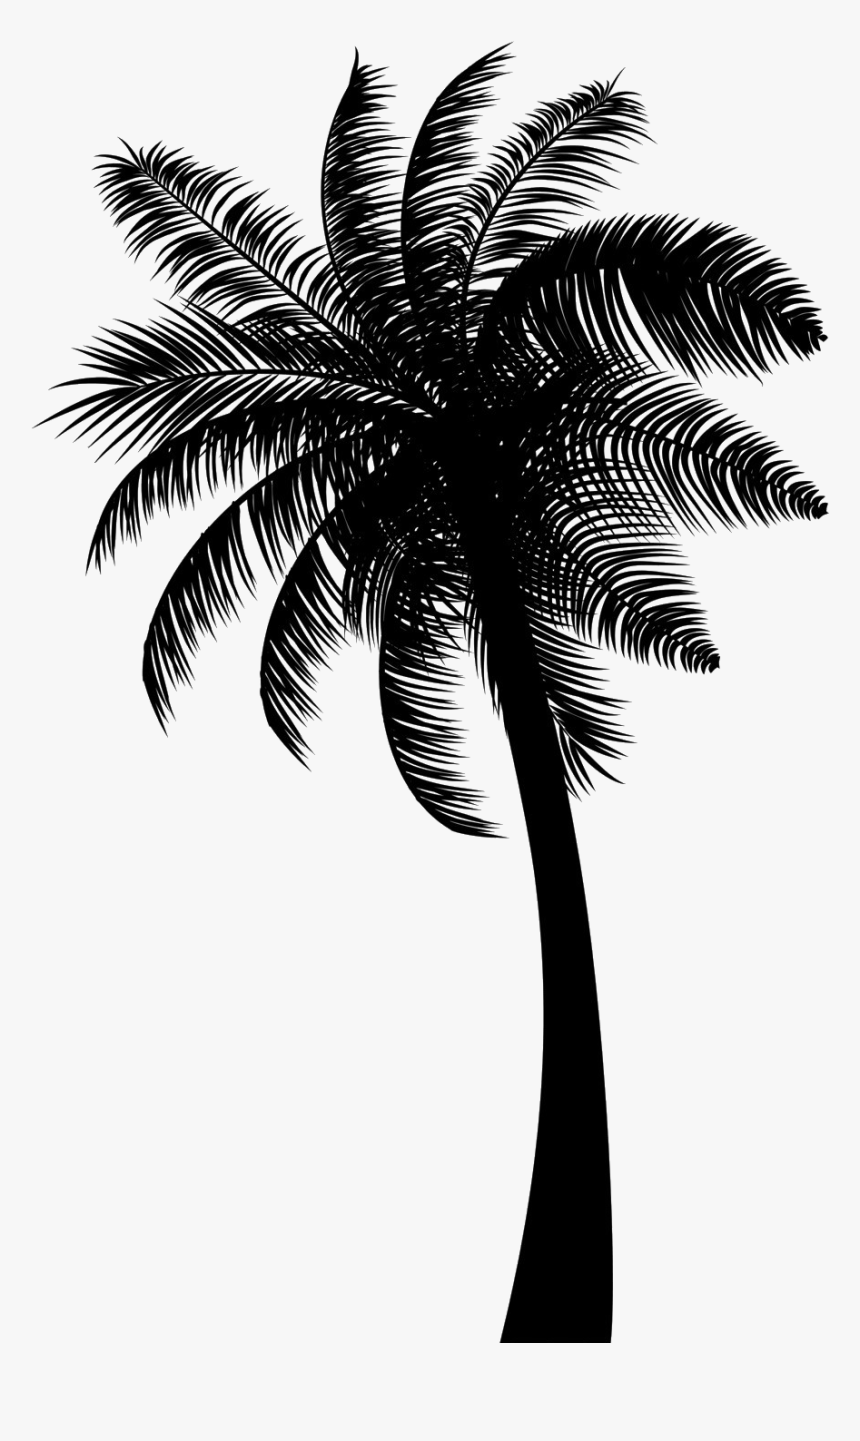 Black Coconut Tree Png Free Download - Coconut Tree Png Black, Transparent Png, Free Download